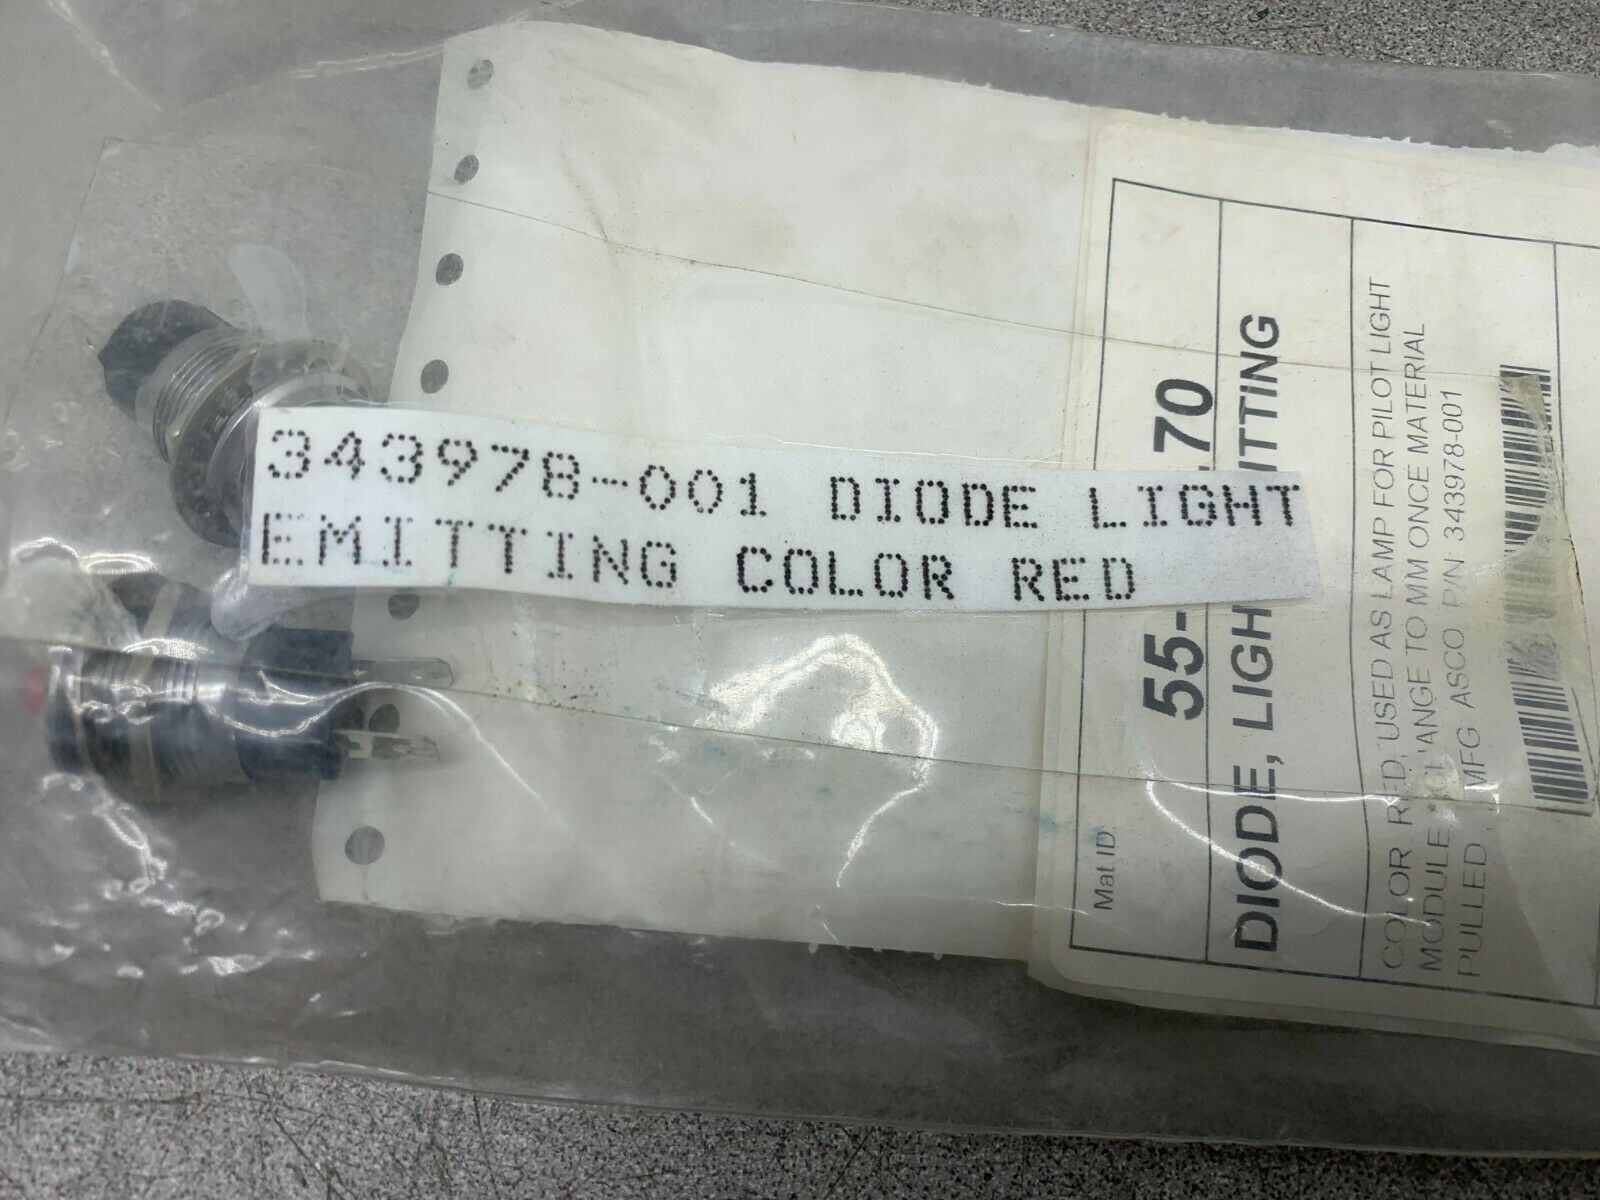 LOT OF 2 NEW ASCO RED DIODE LIGHTS 343978-001